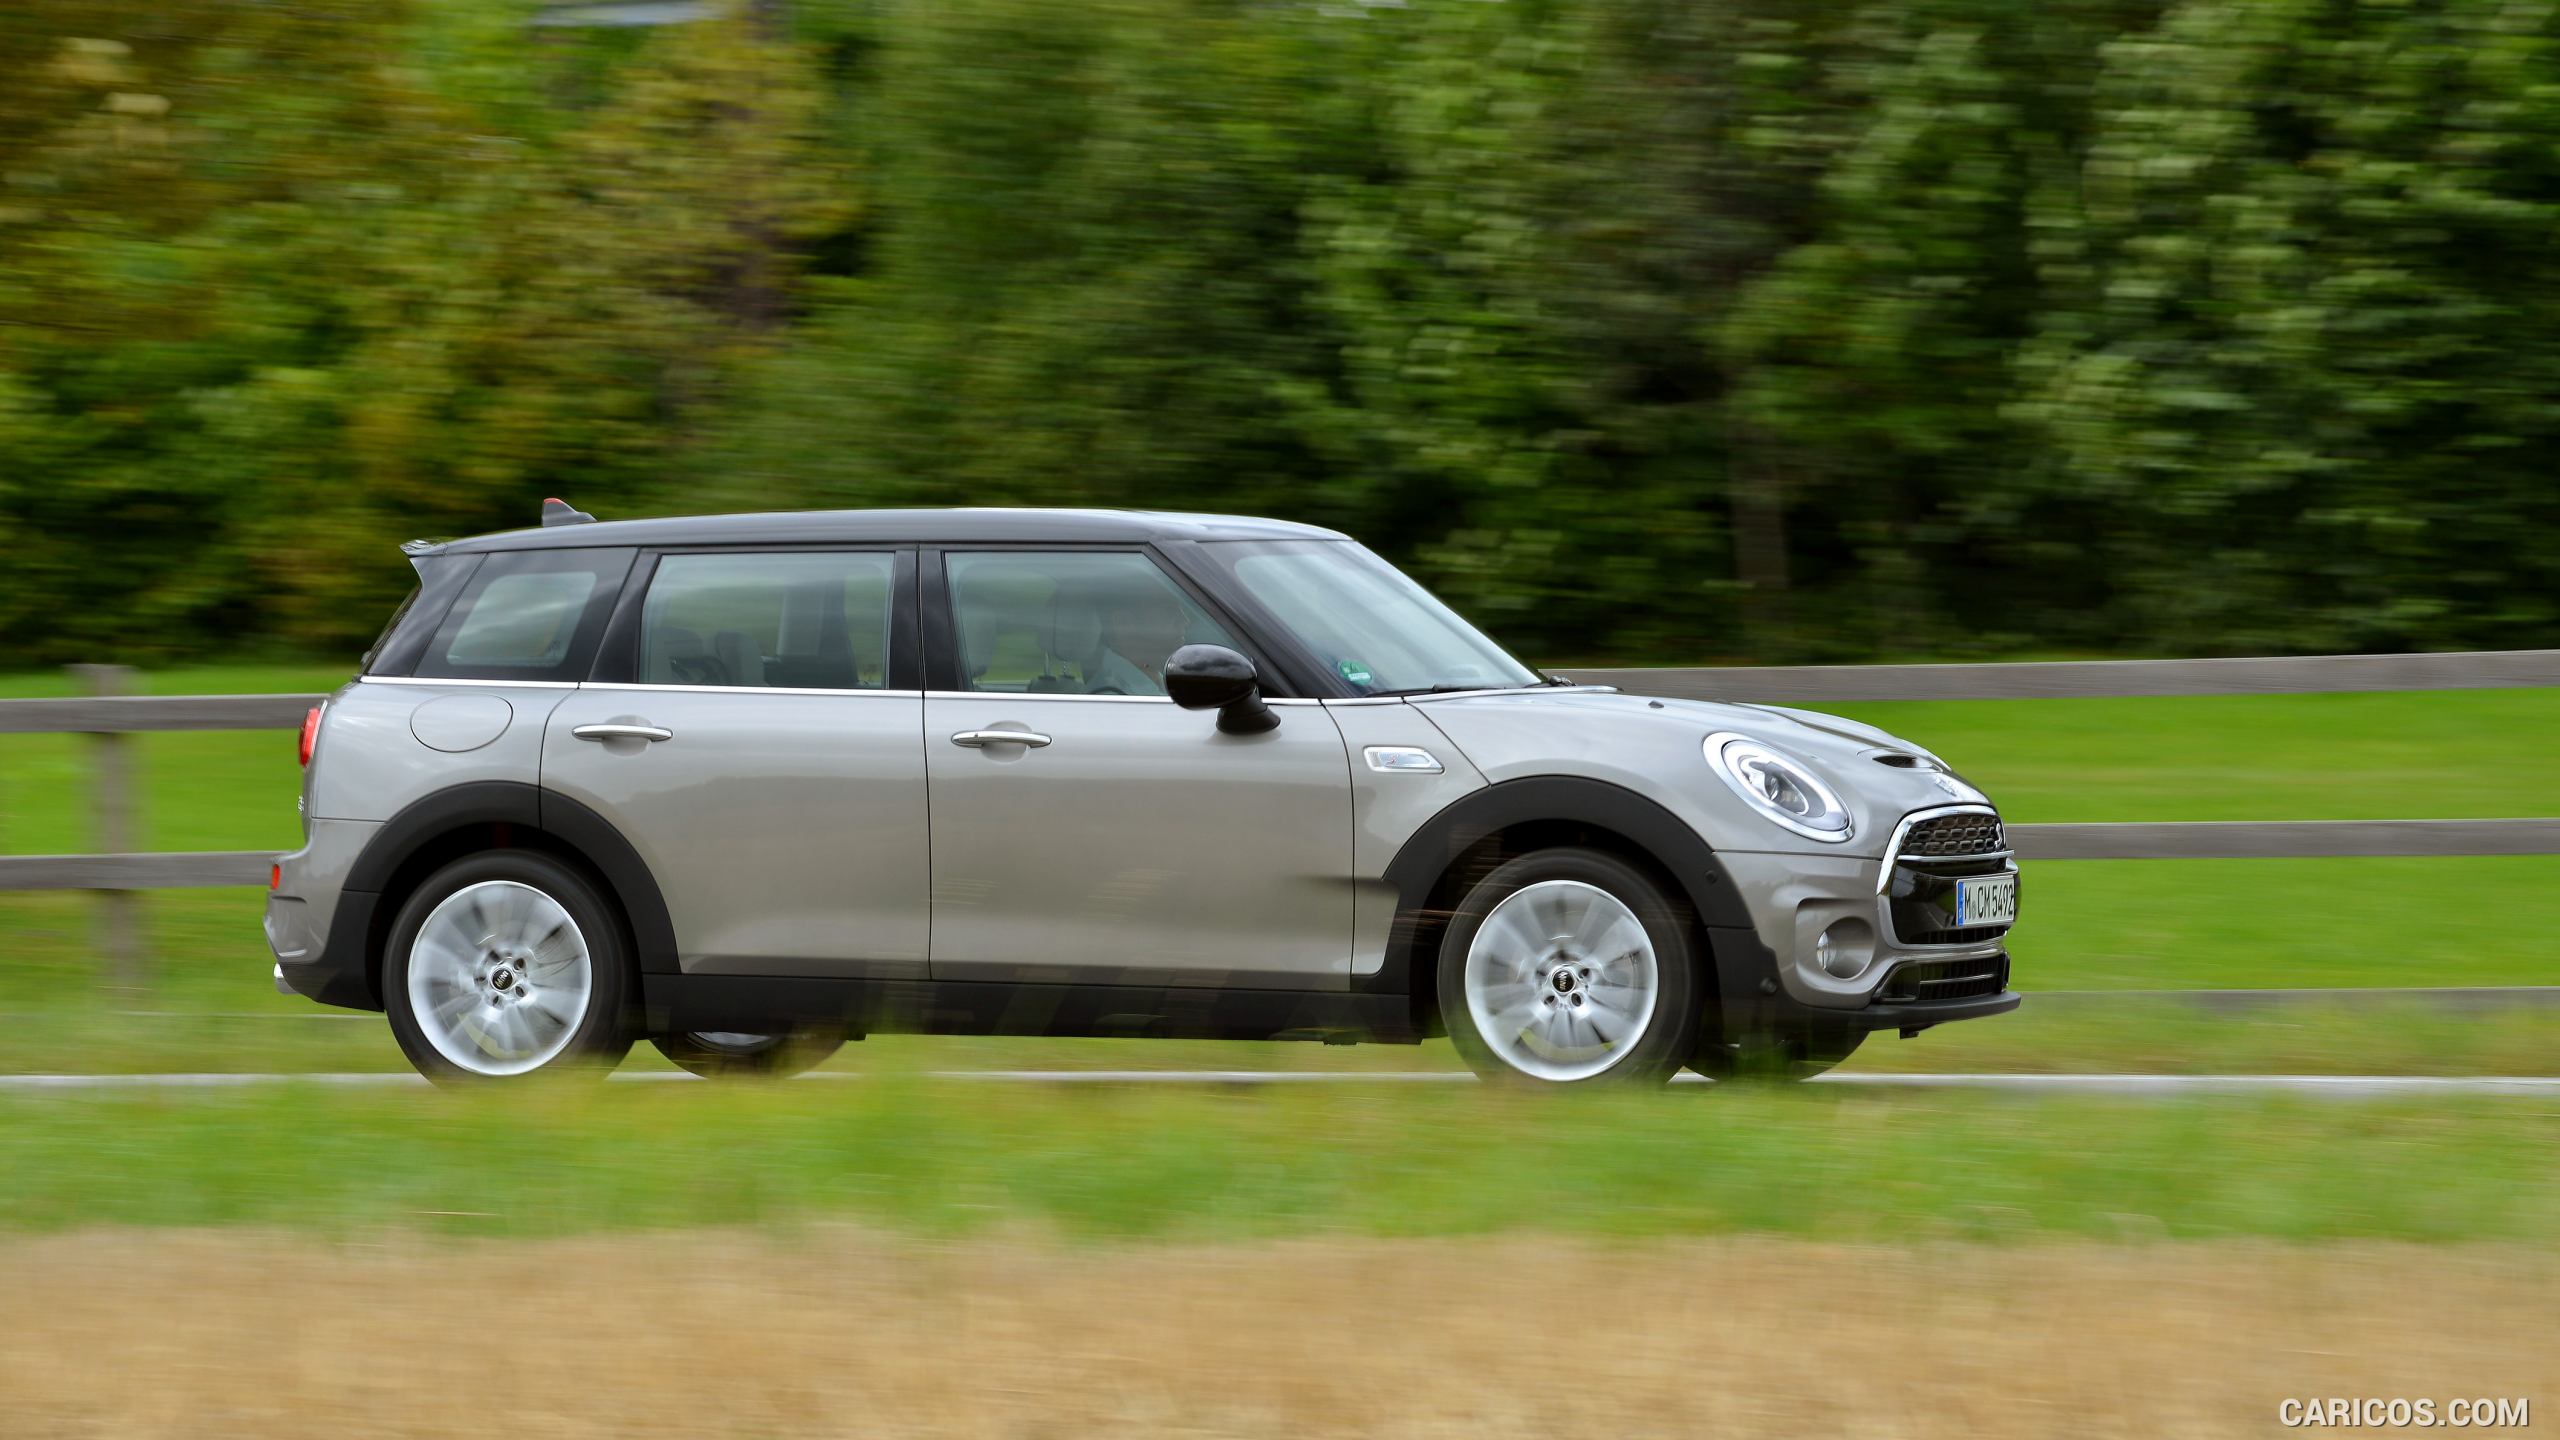 2016 MINI Cooper S Clubman in Metallic Melting Silver - Side, #151 of 380